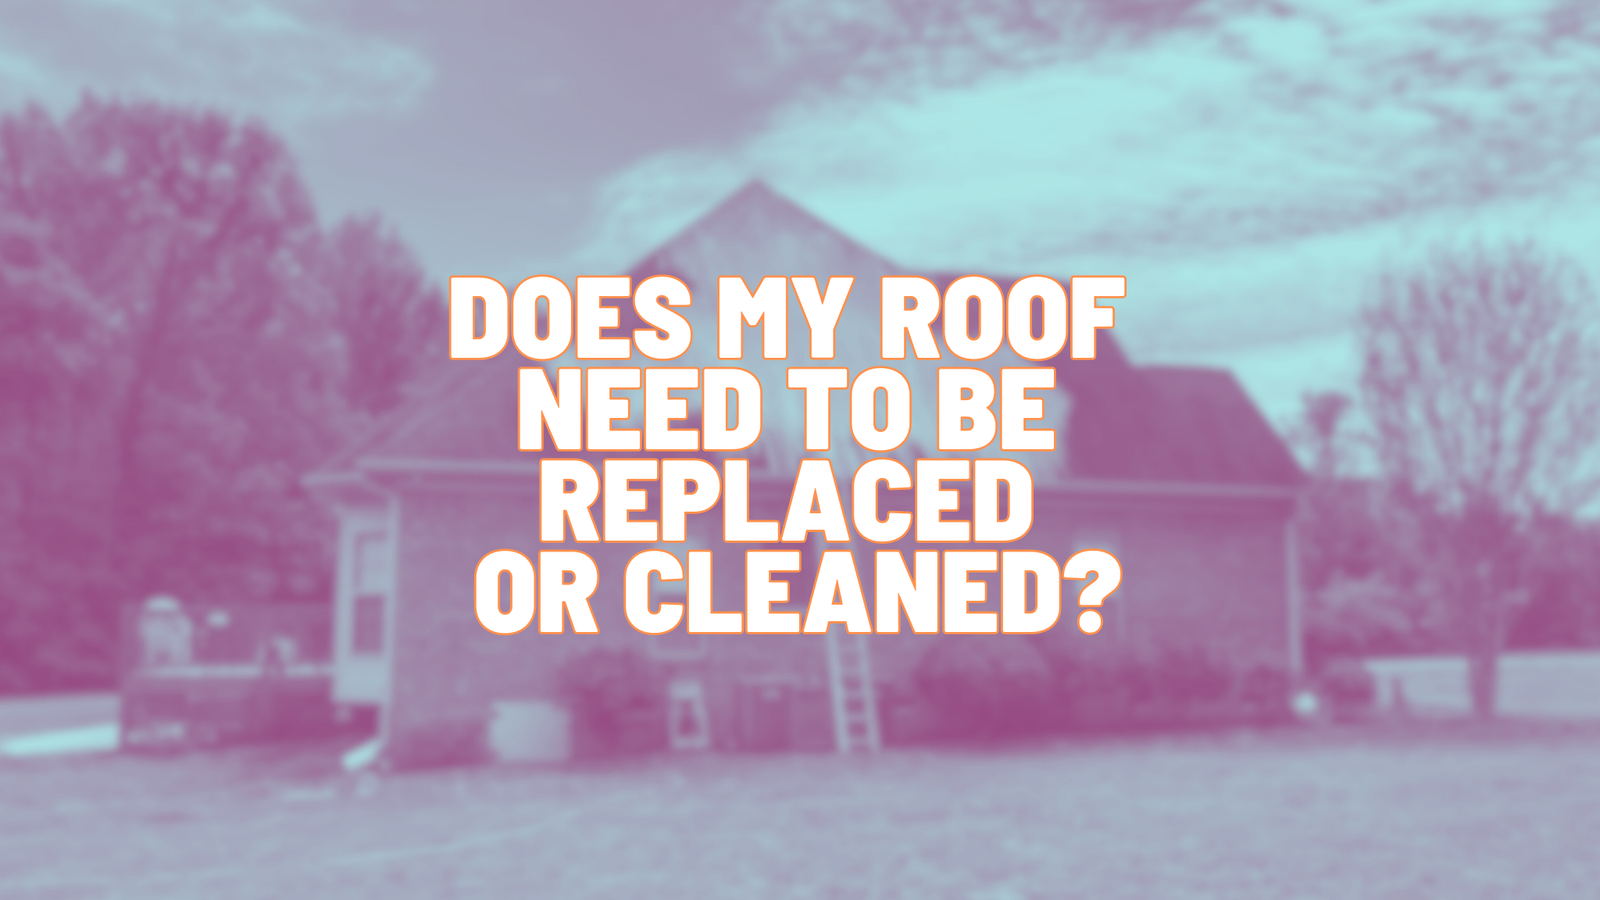 How to Determine if Your Roof Needs Replacement or Cleaning